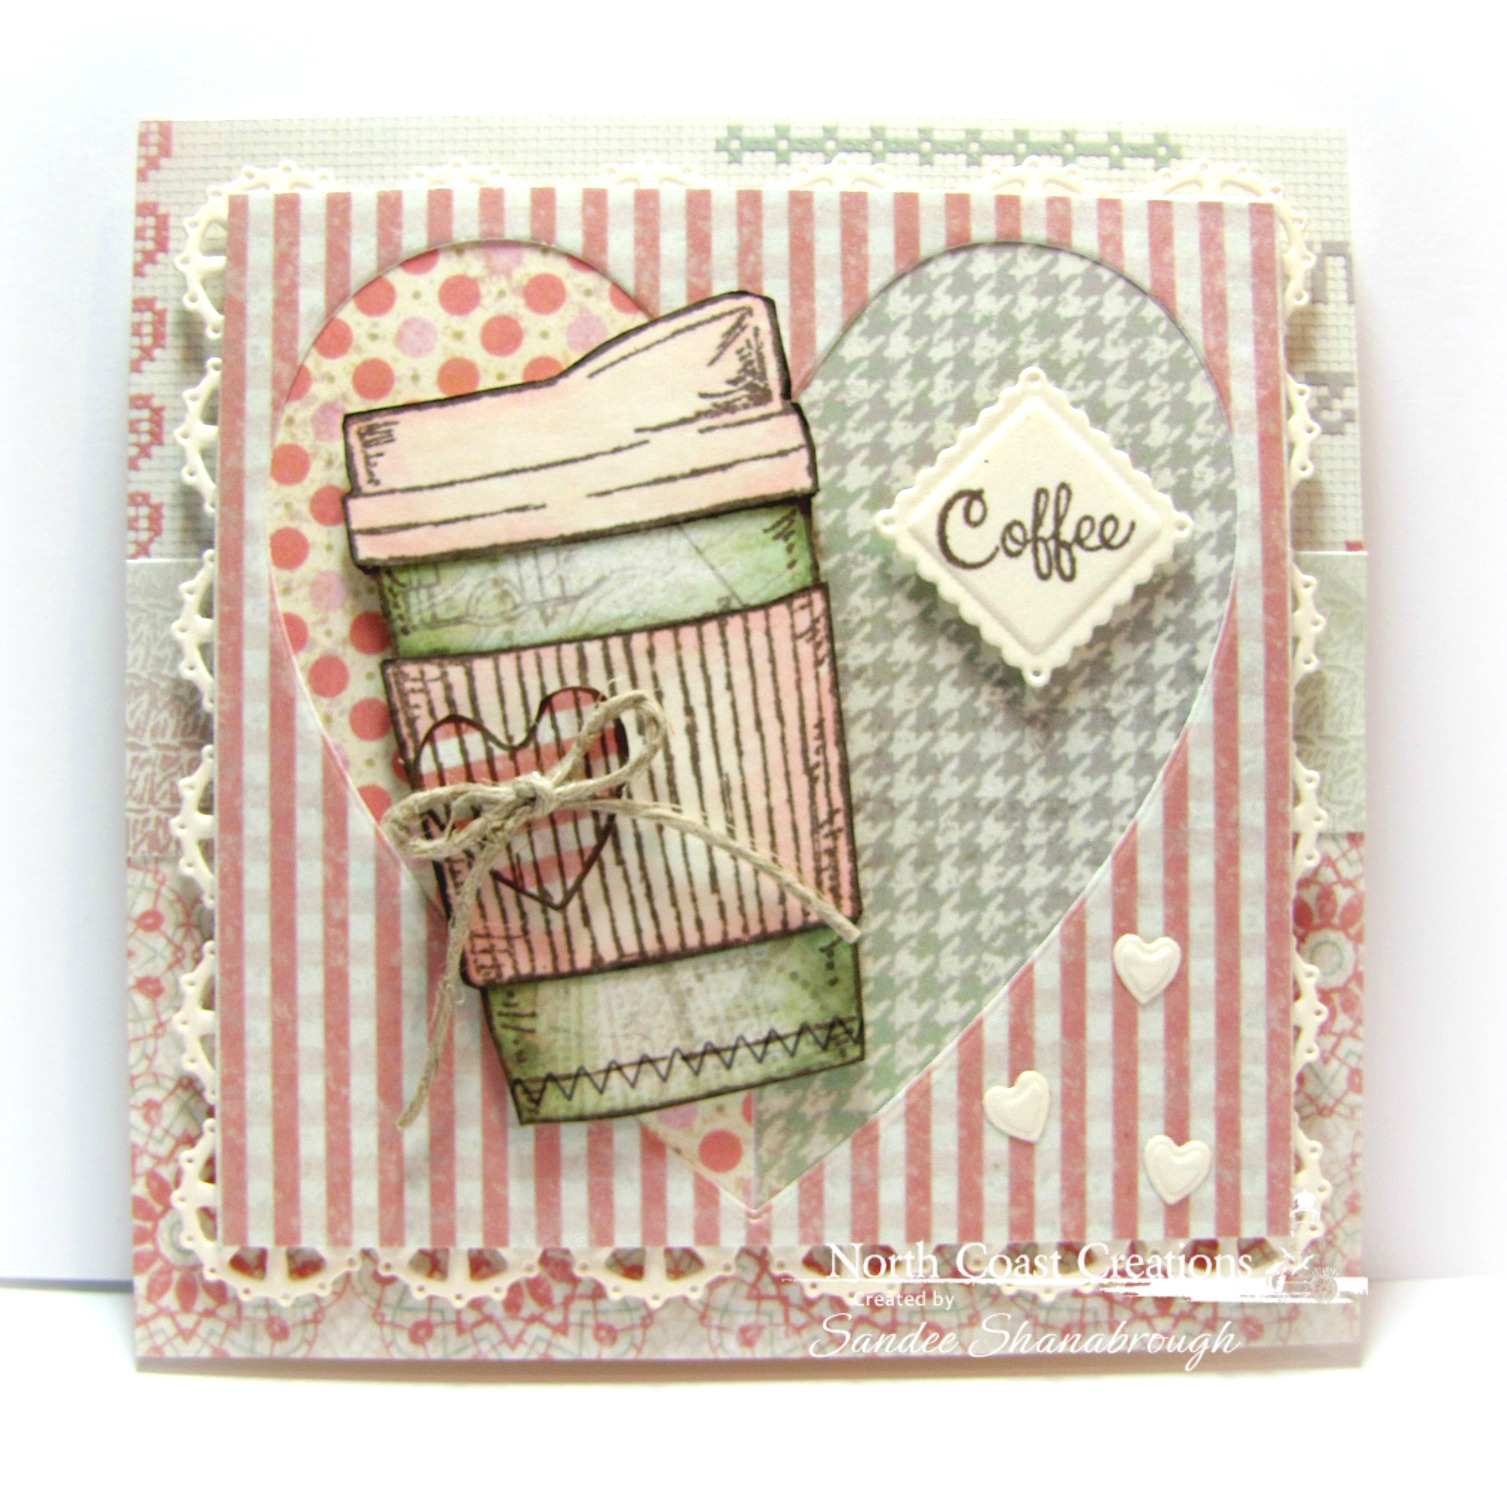 Stamps - North Coast Creations Warm My Heart, Our Daily Bread Designs Blushing Rose Paper Collection, ODBD Soulful Stitches Paper Collection, ODBD Layered Lacey Squares Die, ODBD Umbrellas Die, ODBD Ornate Hearts Die